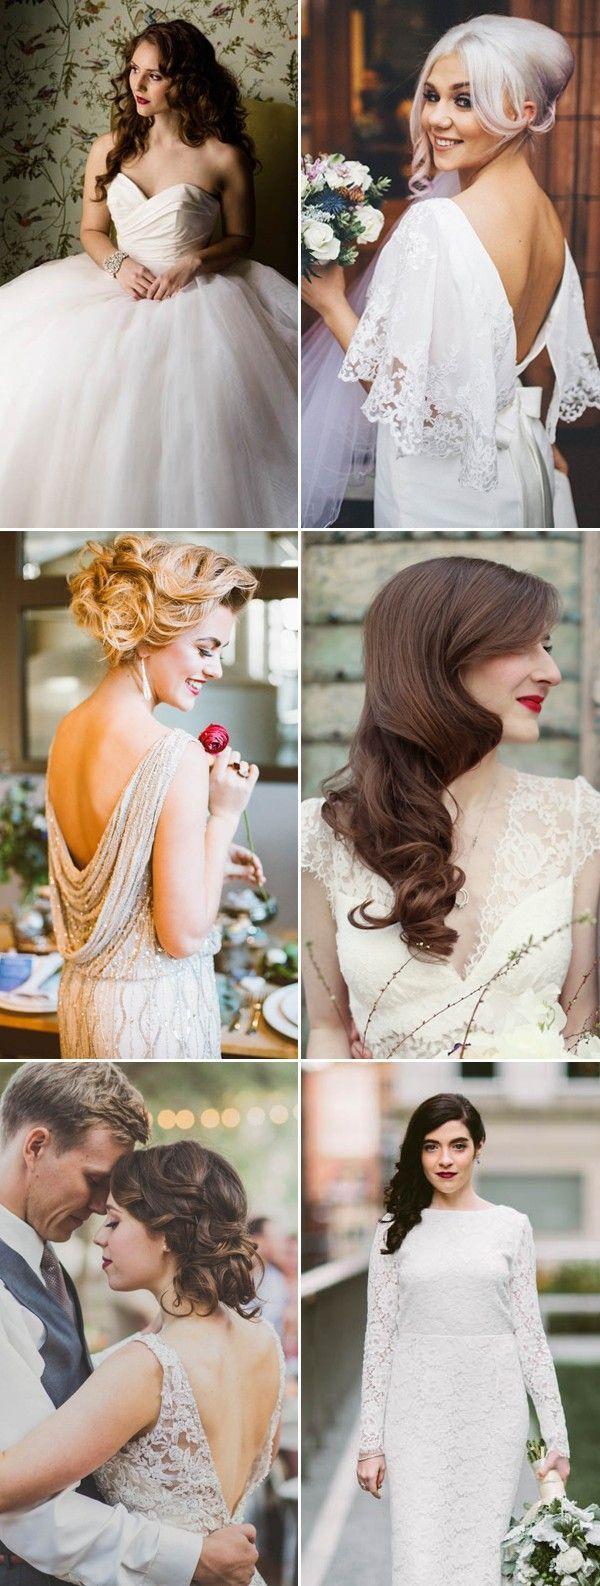 Wedding - How To Nail Your Vintage Bridal Style